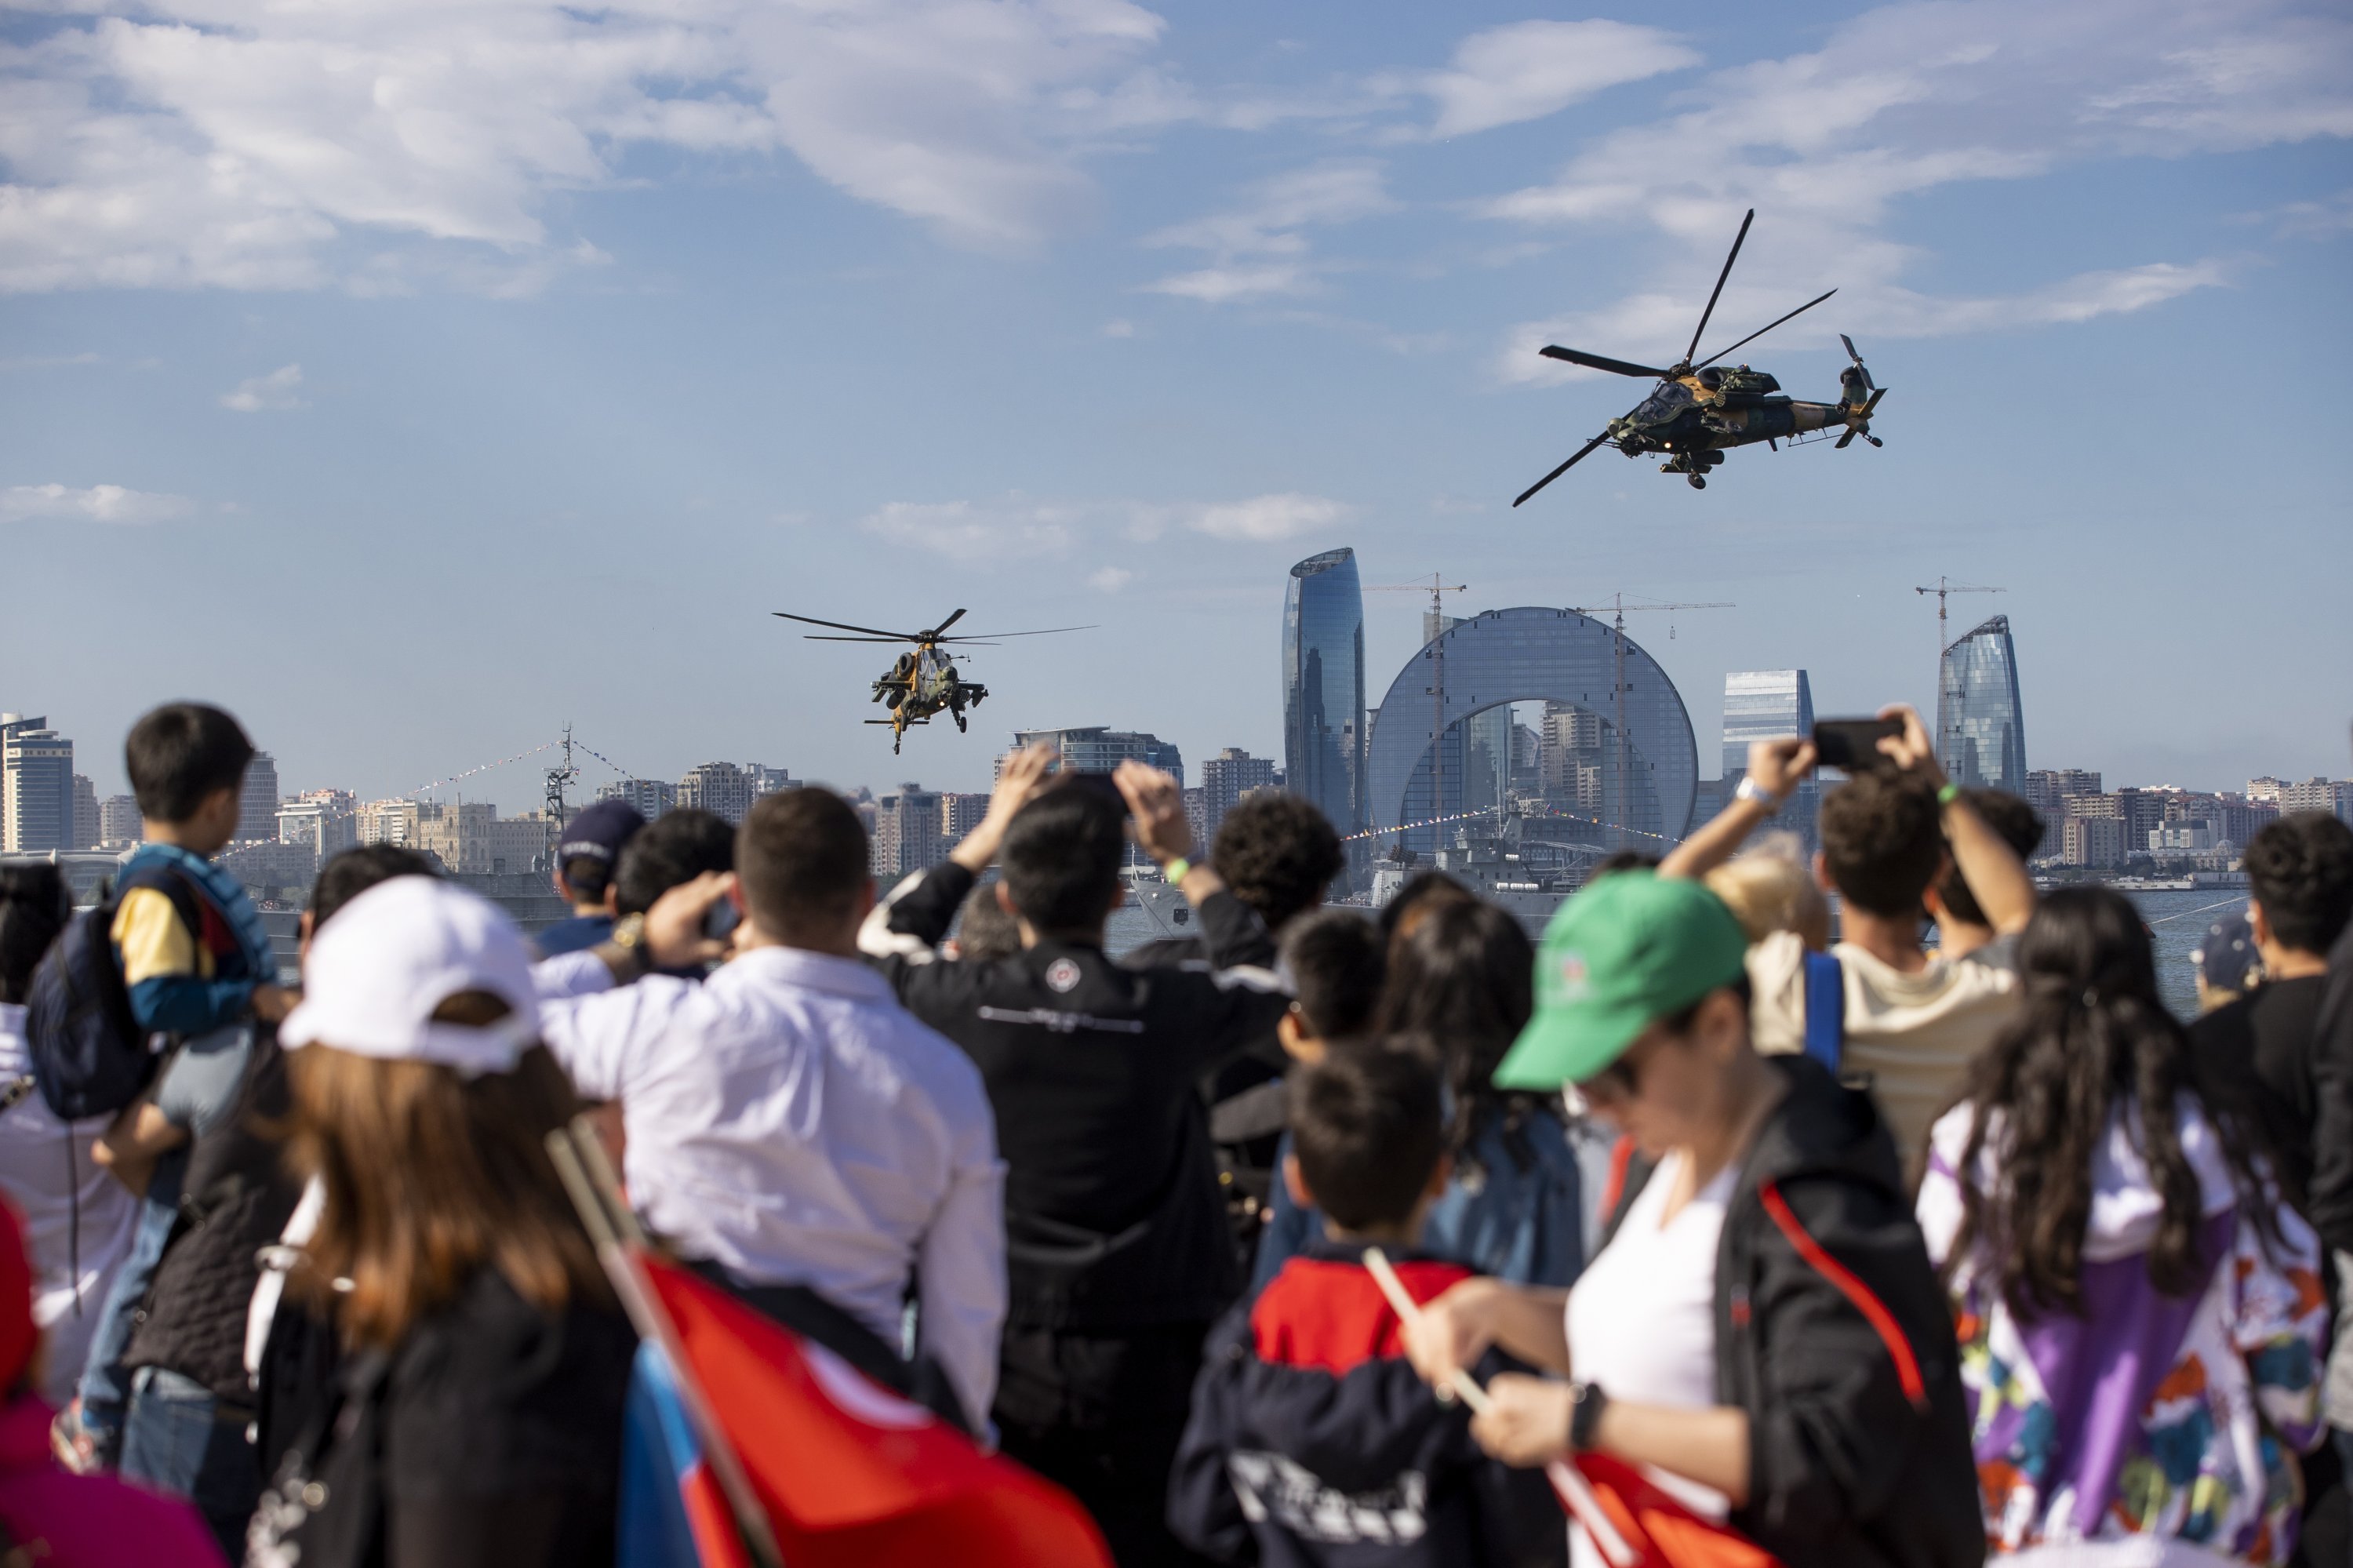 T129 Tactical Reconnaissance and Attack Helicopters (ATAK) fly in the capital Baku during the aerospace and technology festival Teknofest, Azerbaijan, May 27, 2022. (AA Photo)